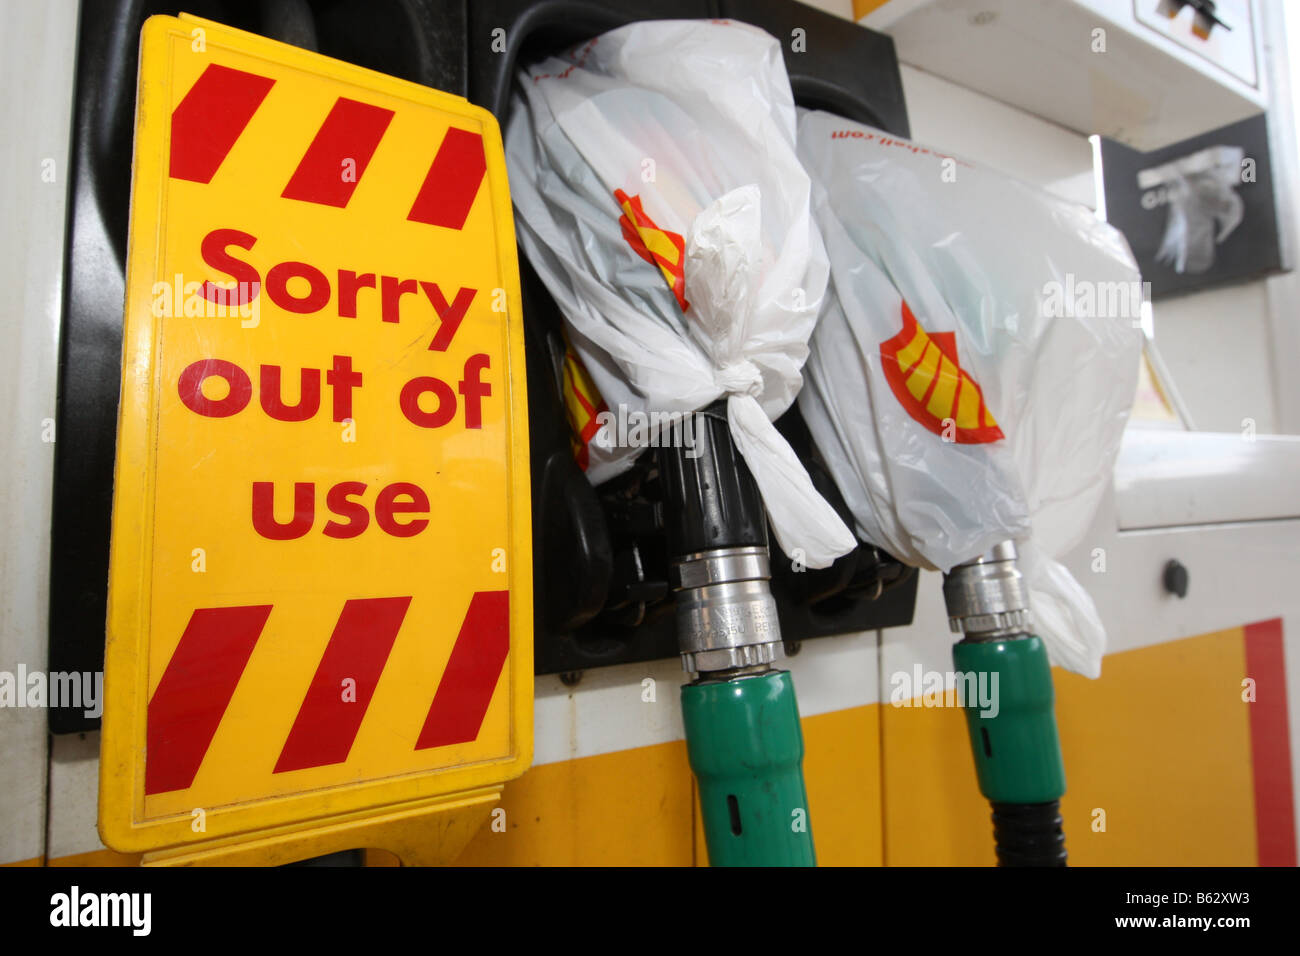 OUT OF USE SHELL PETROL PUMPS Stock Photo